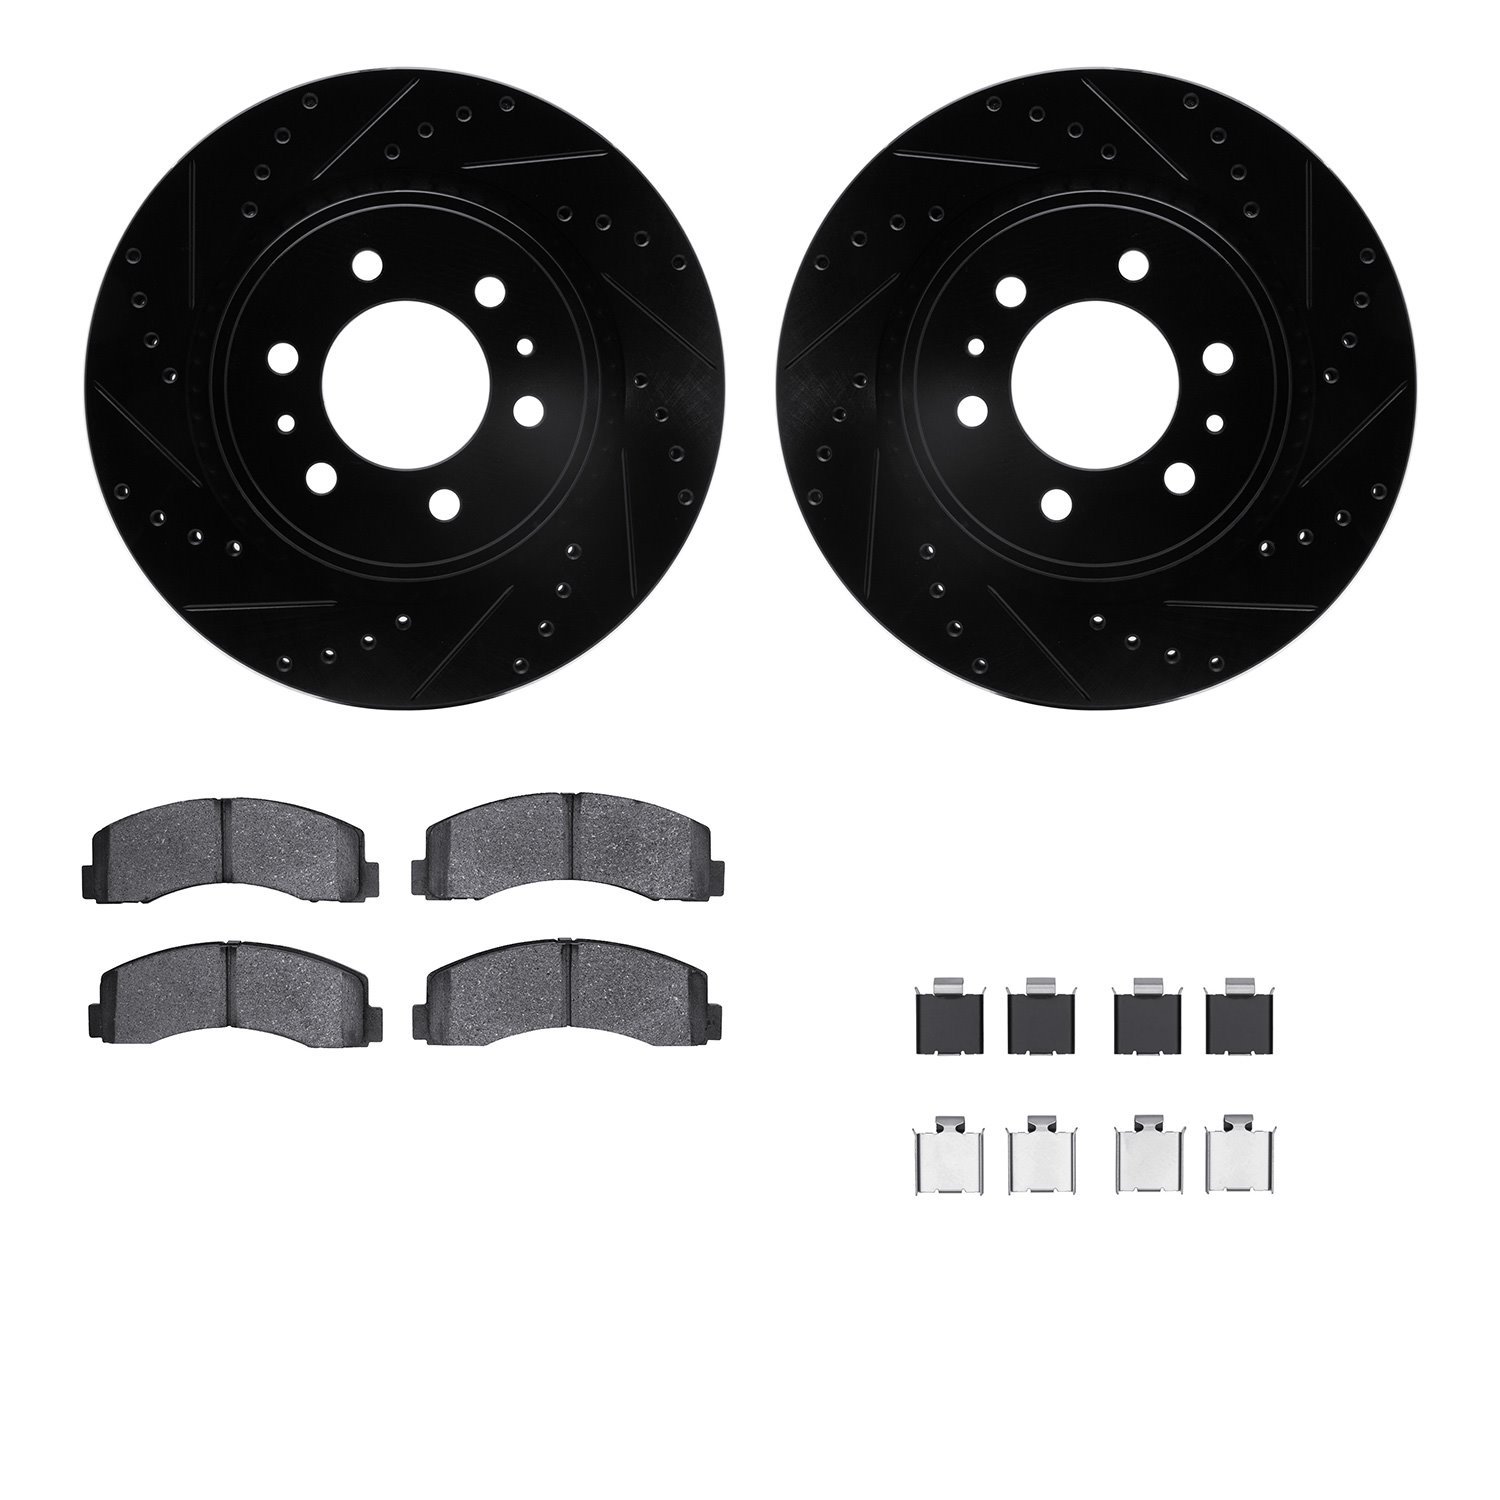 8412-54090 Drilled/Slotted Brake Rotors with Ultimate-Duty Brake Pads Kit & Hardware [Black], 2010-2021 Ford/Lincoln/Mercury/Maz